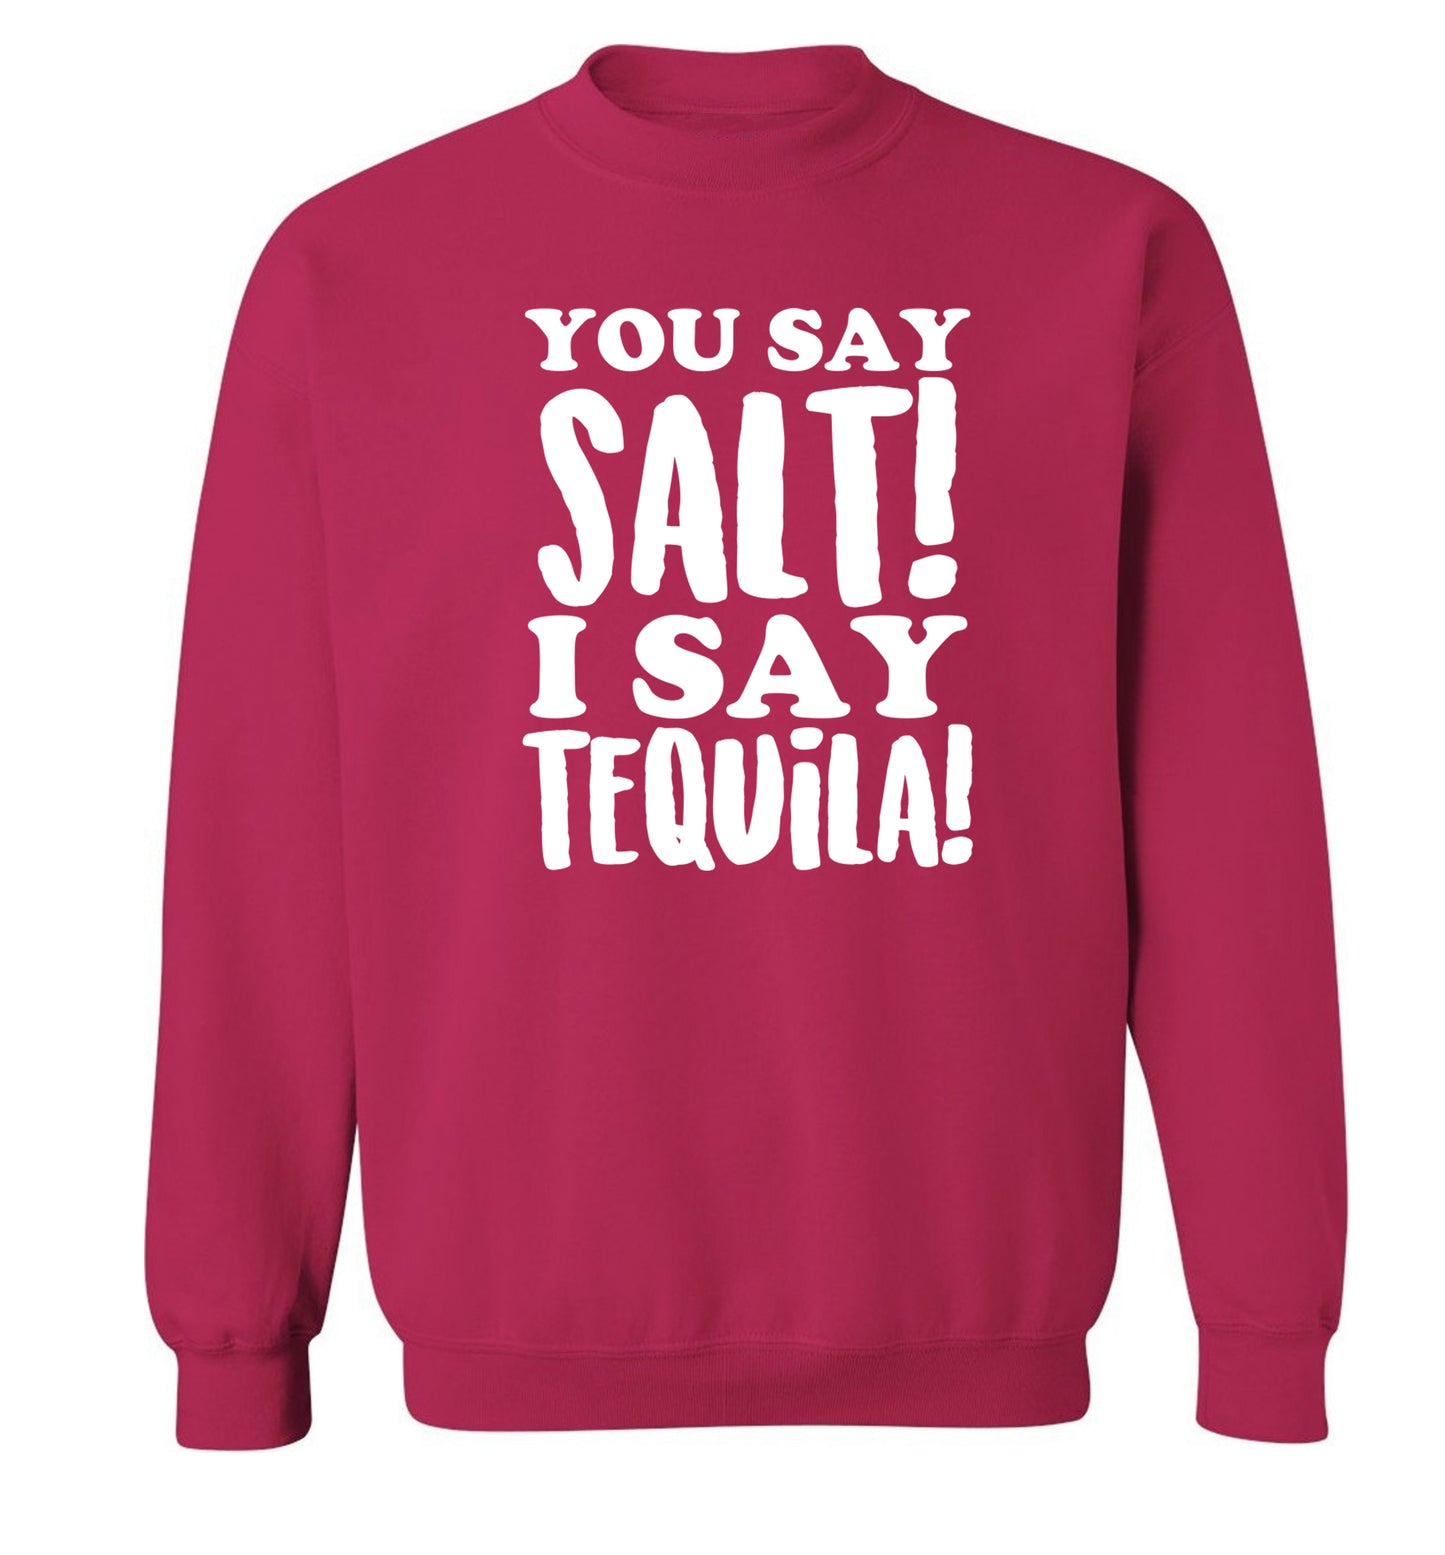 You say salt I say tequila Adult's unisex pink Sweater 2XL